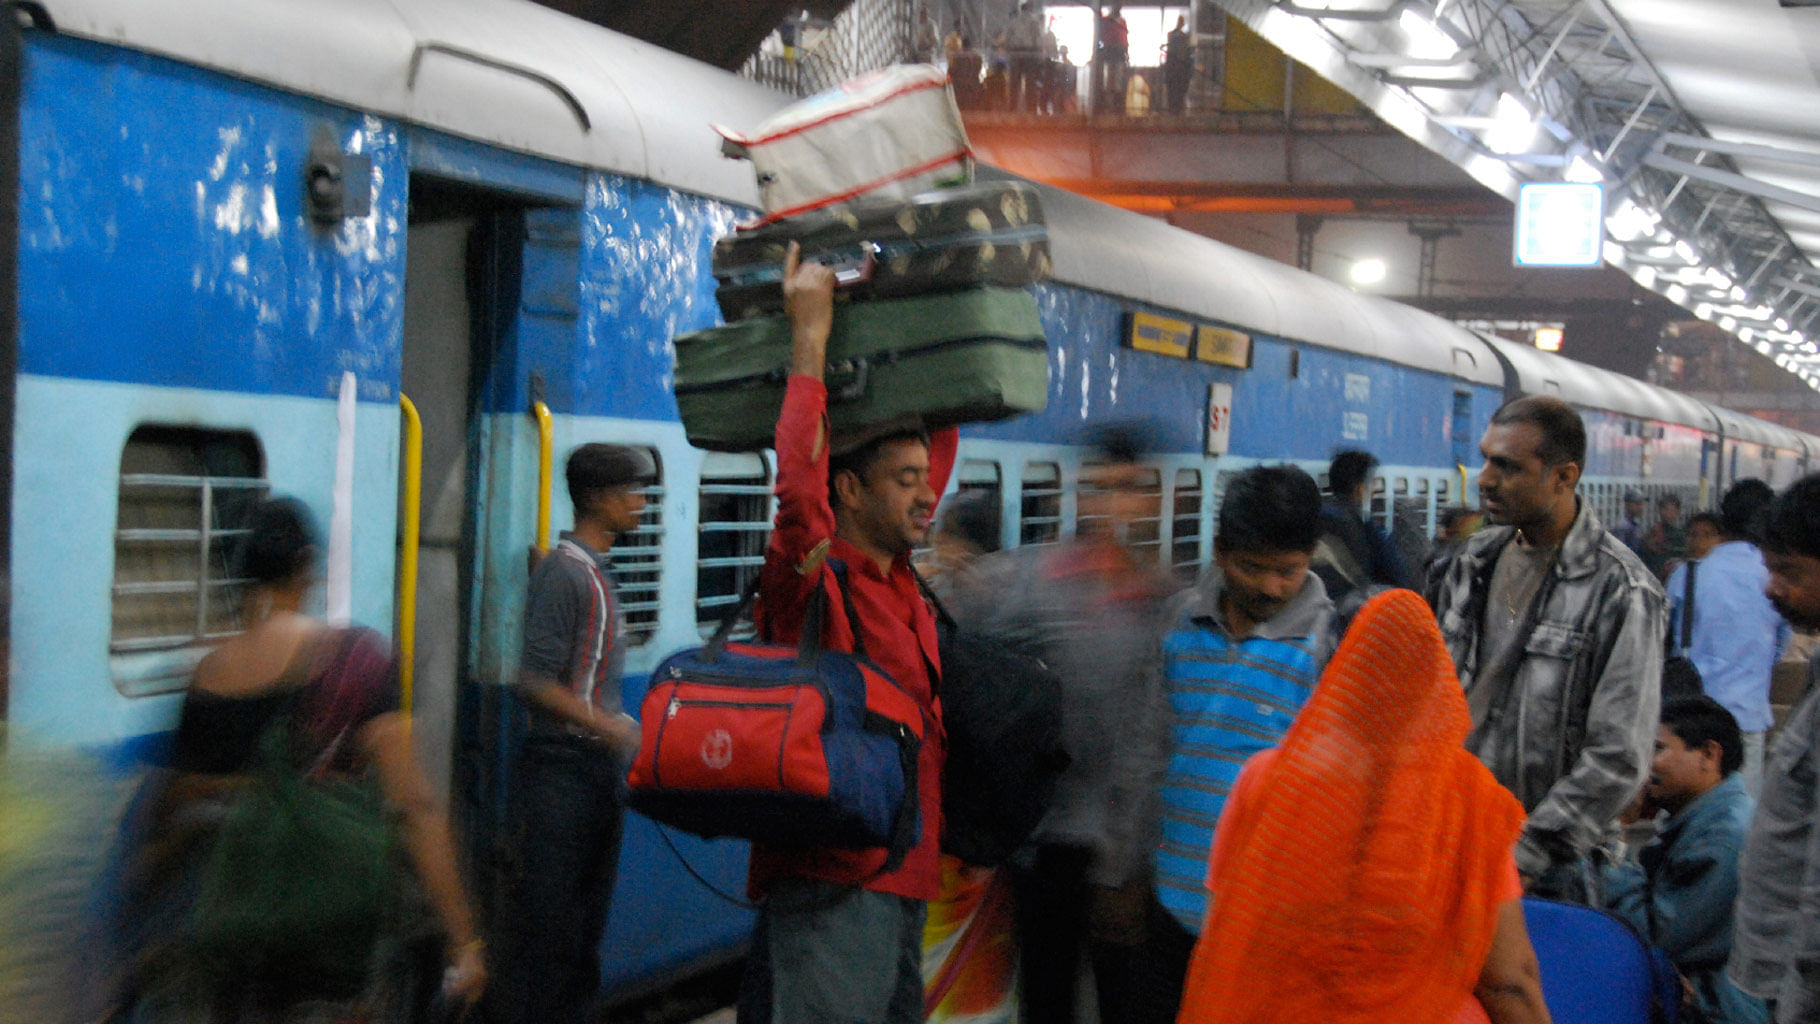 A porter carrying luggage at a Delhi railway station. (Photo: iStockphoto)